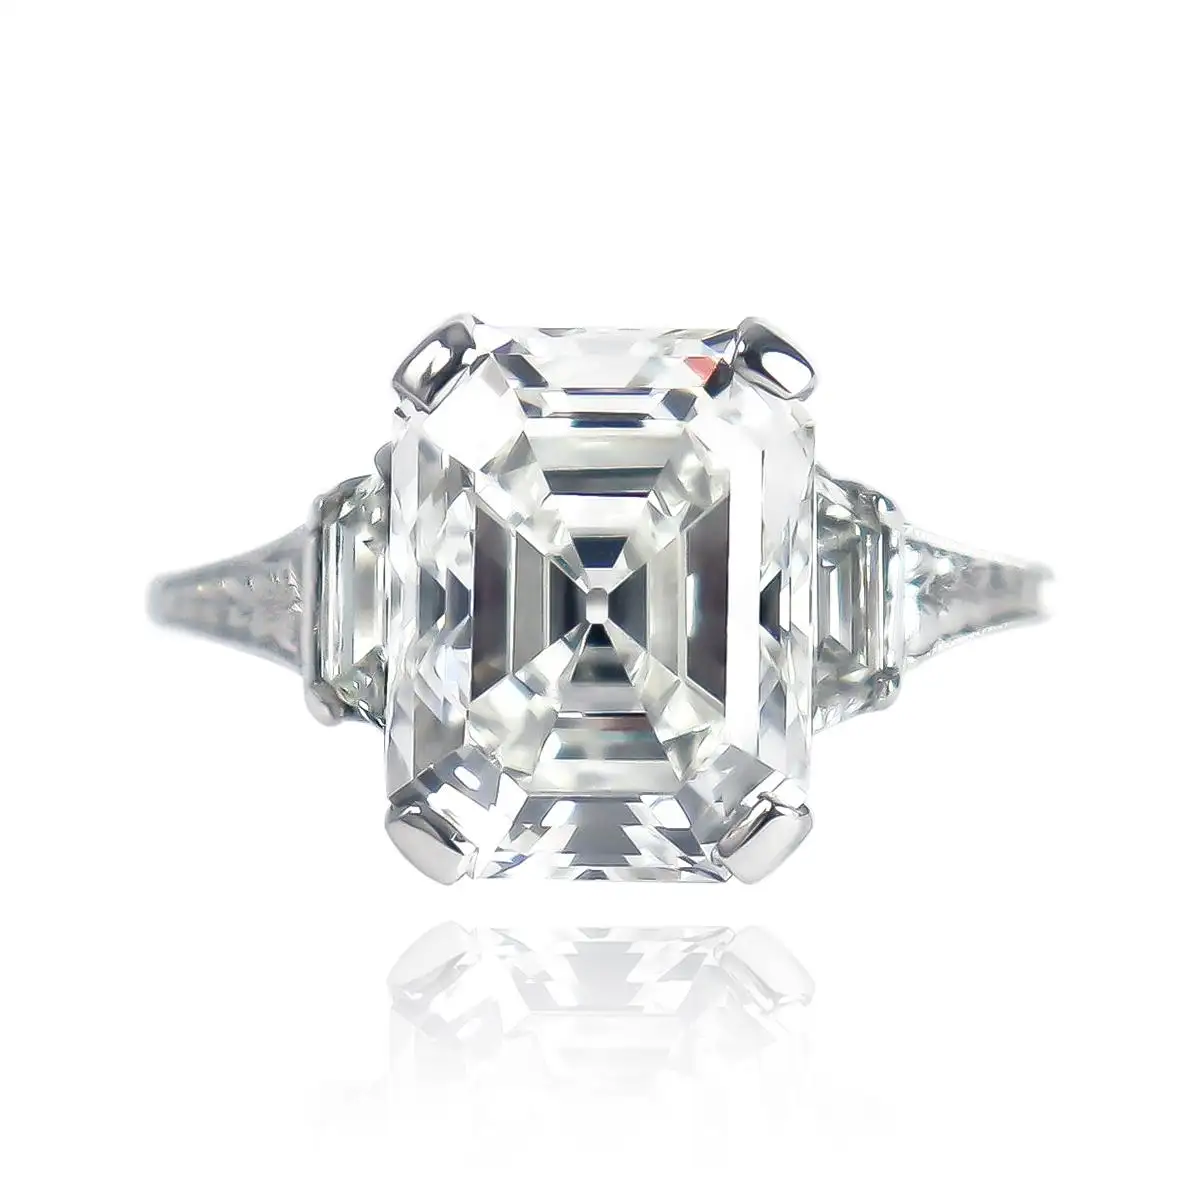 4.07-ct-Emerald-Cut-Diamond-Art-Deco-Engagement-Ring-with-Trapezoid-Side-Stones-4.webp